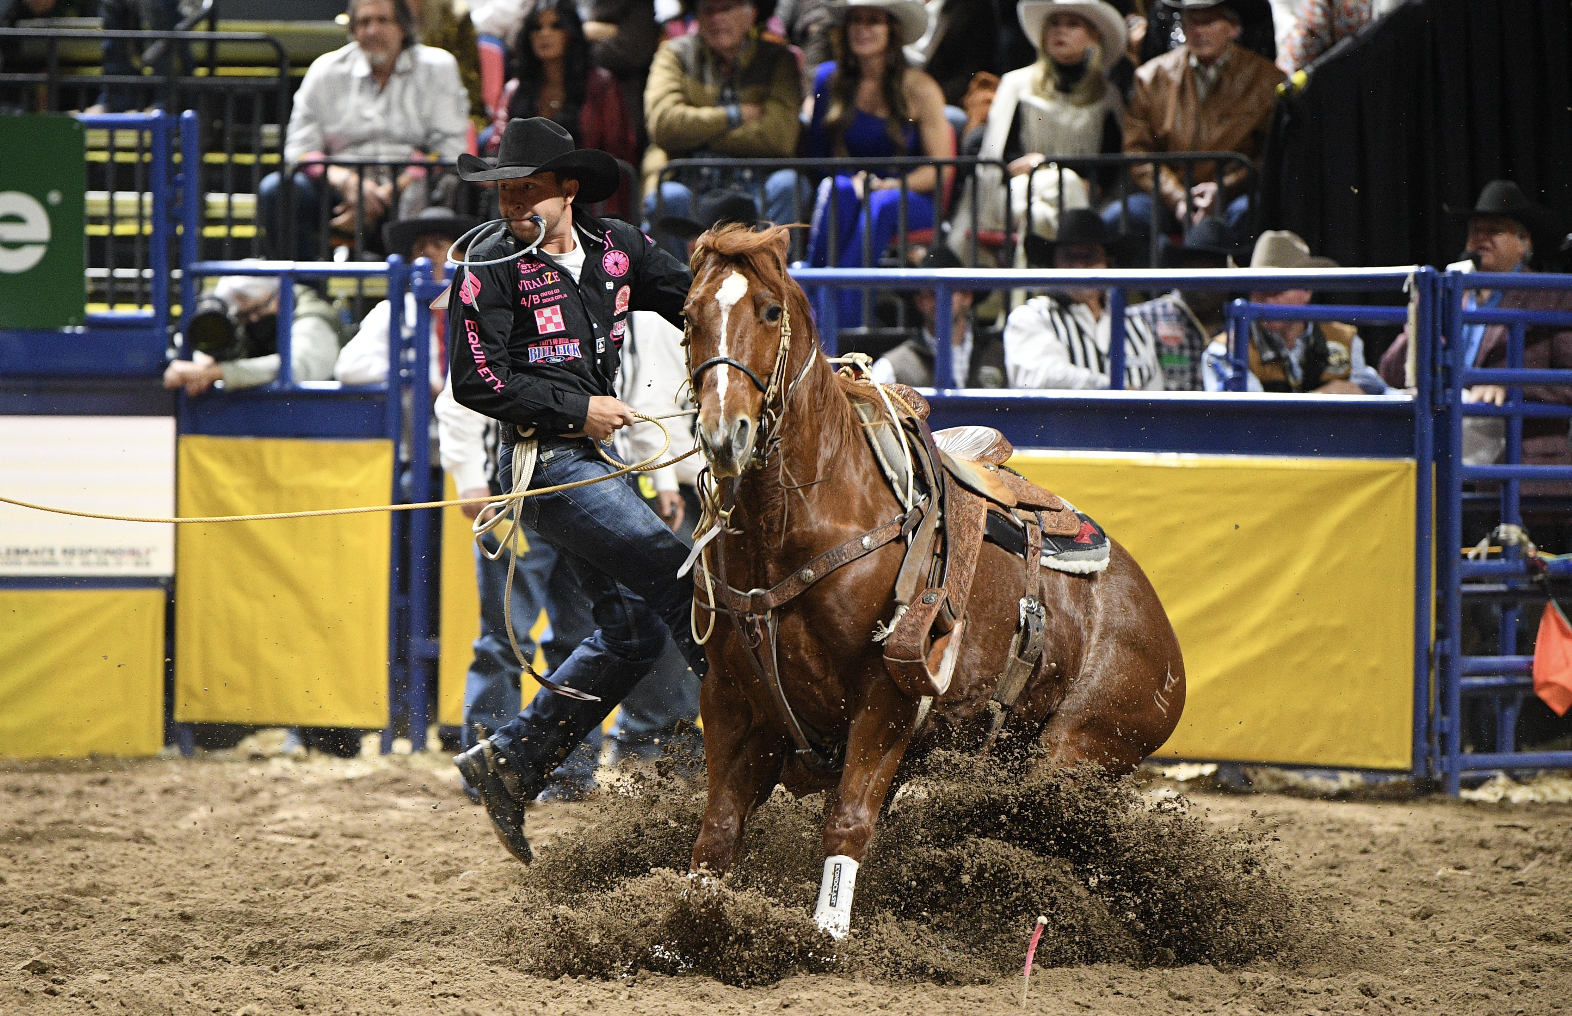 Haven Meged proved his staying power throughout the NFR, winning the average and setting a new record with a time or 77.4 seconds on 10 head.